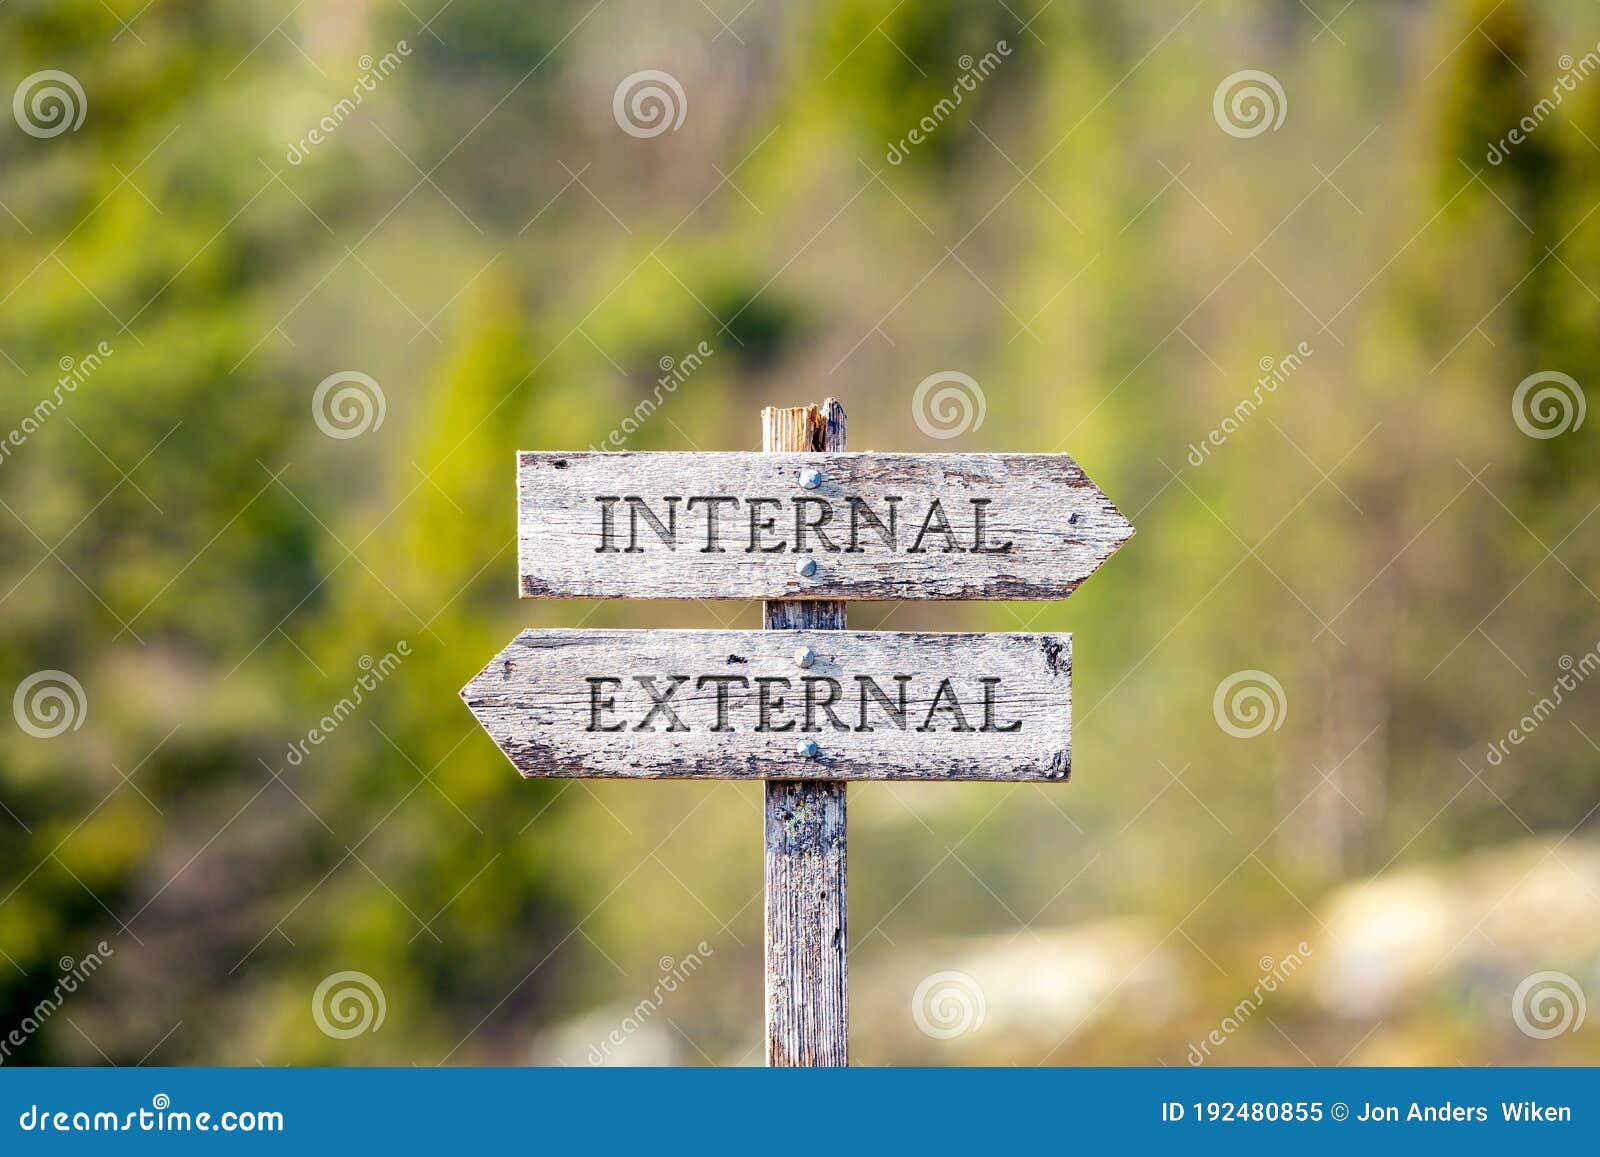 internal external text carved on wooden signpost outdoors in nature.